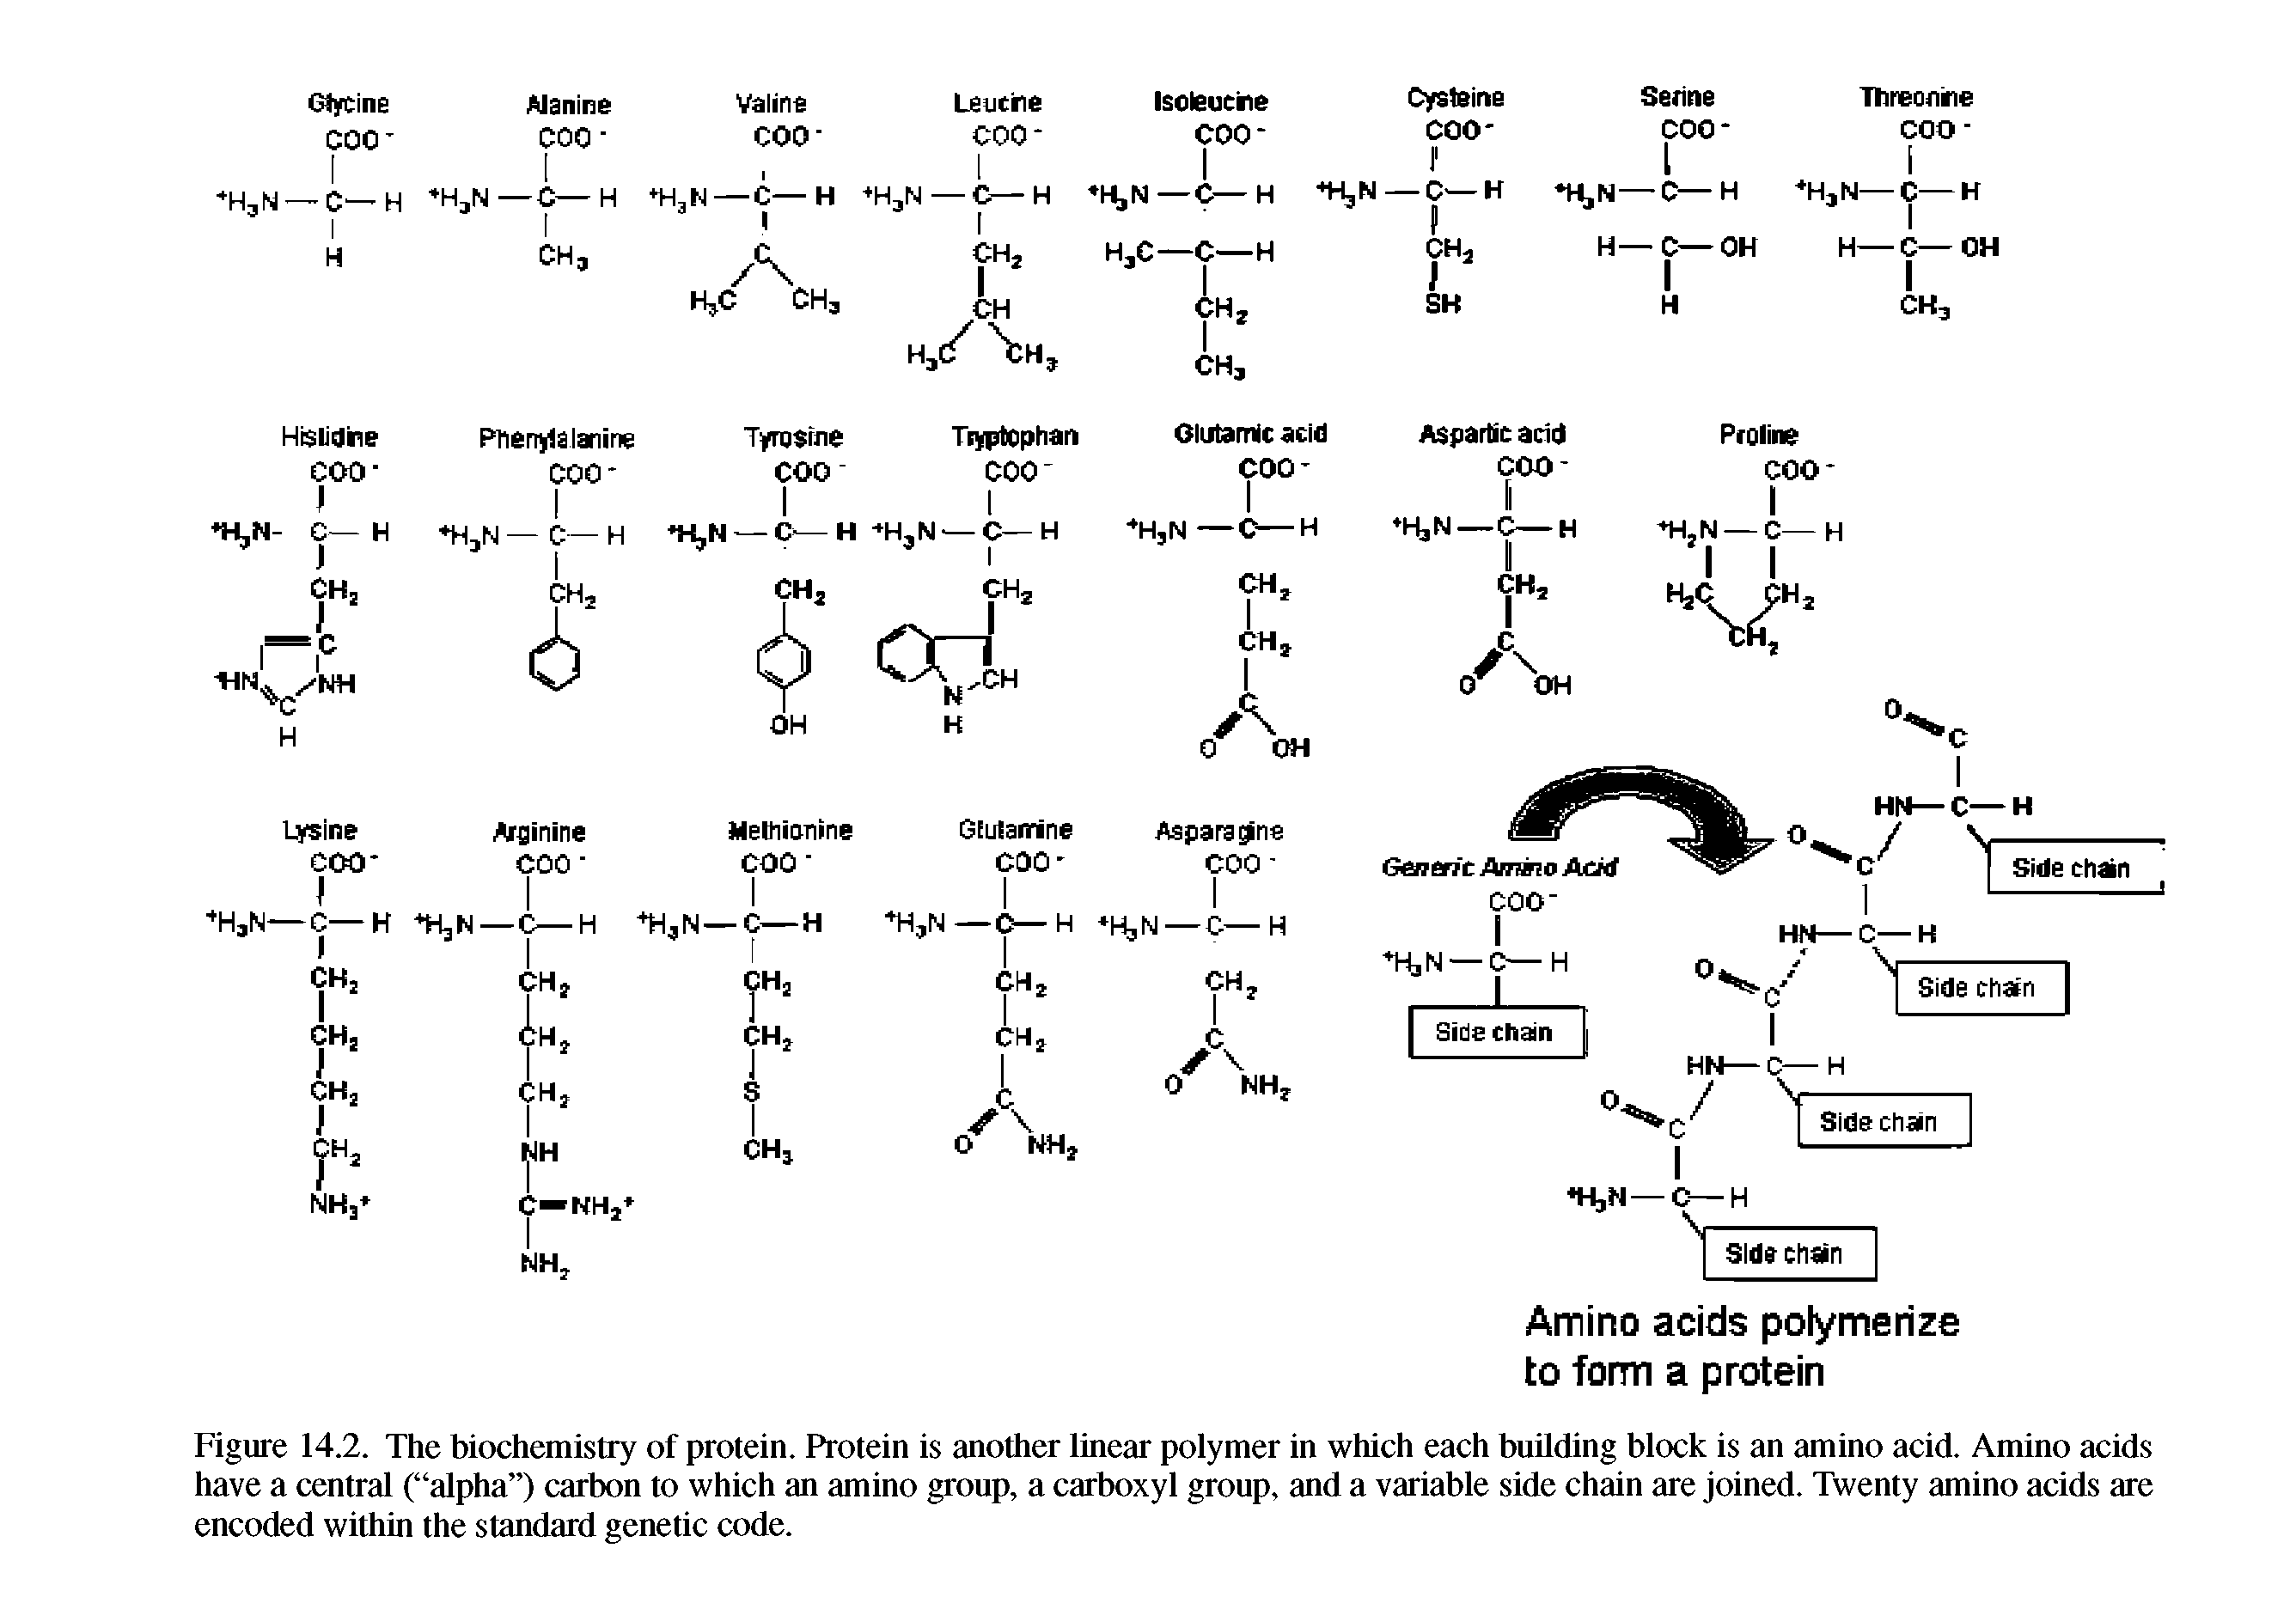 Figure 14.2. The biochemistry of protein. Protein is another linear polymer in which each building block is an amino acid. Amino acids have a central ( alpha ) carbon to which an amino group, a carboxyl group, and a variable side chain are joined. Twenty amino acids are encoded within the standard genetic code.